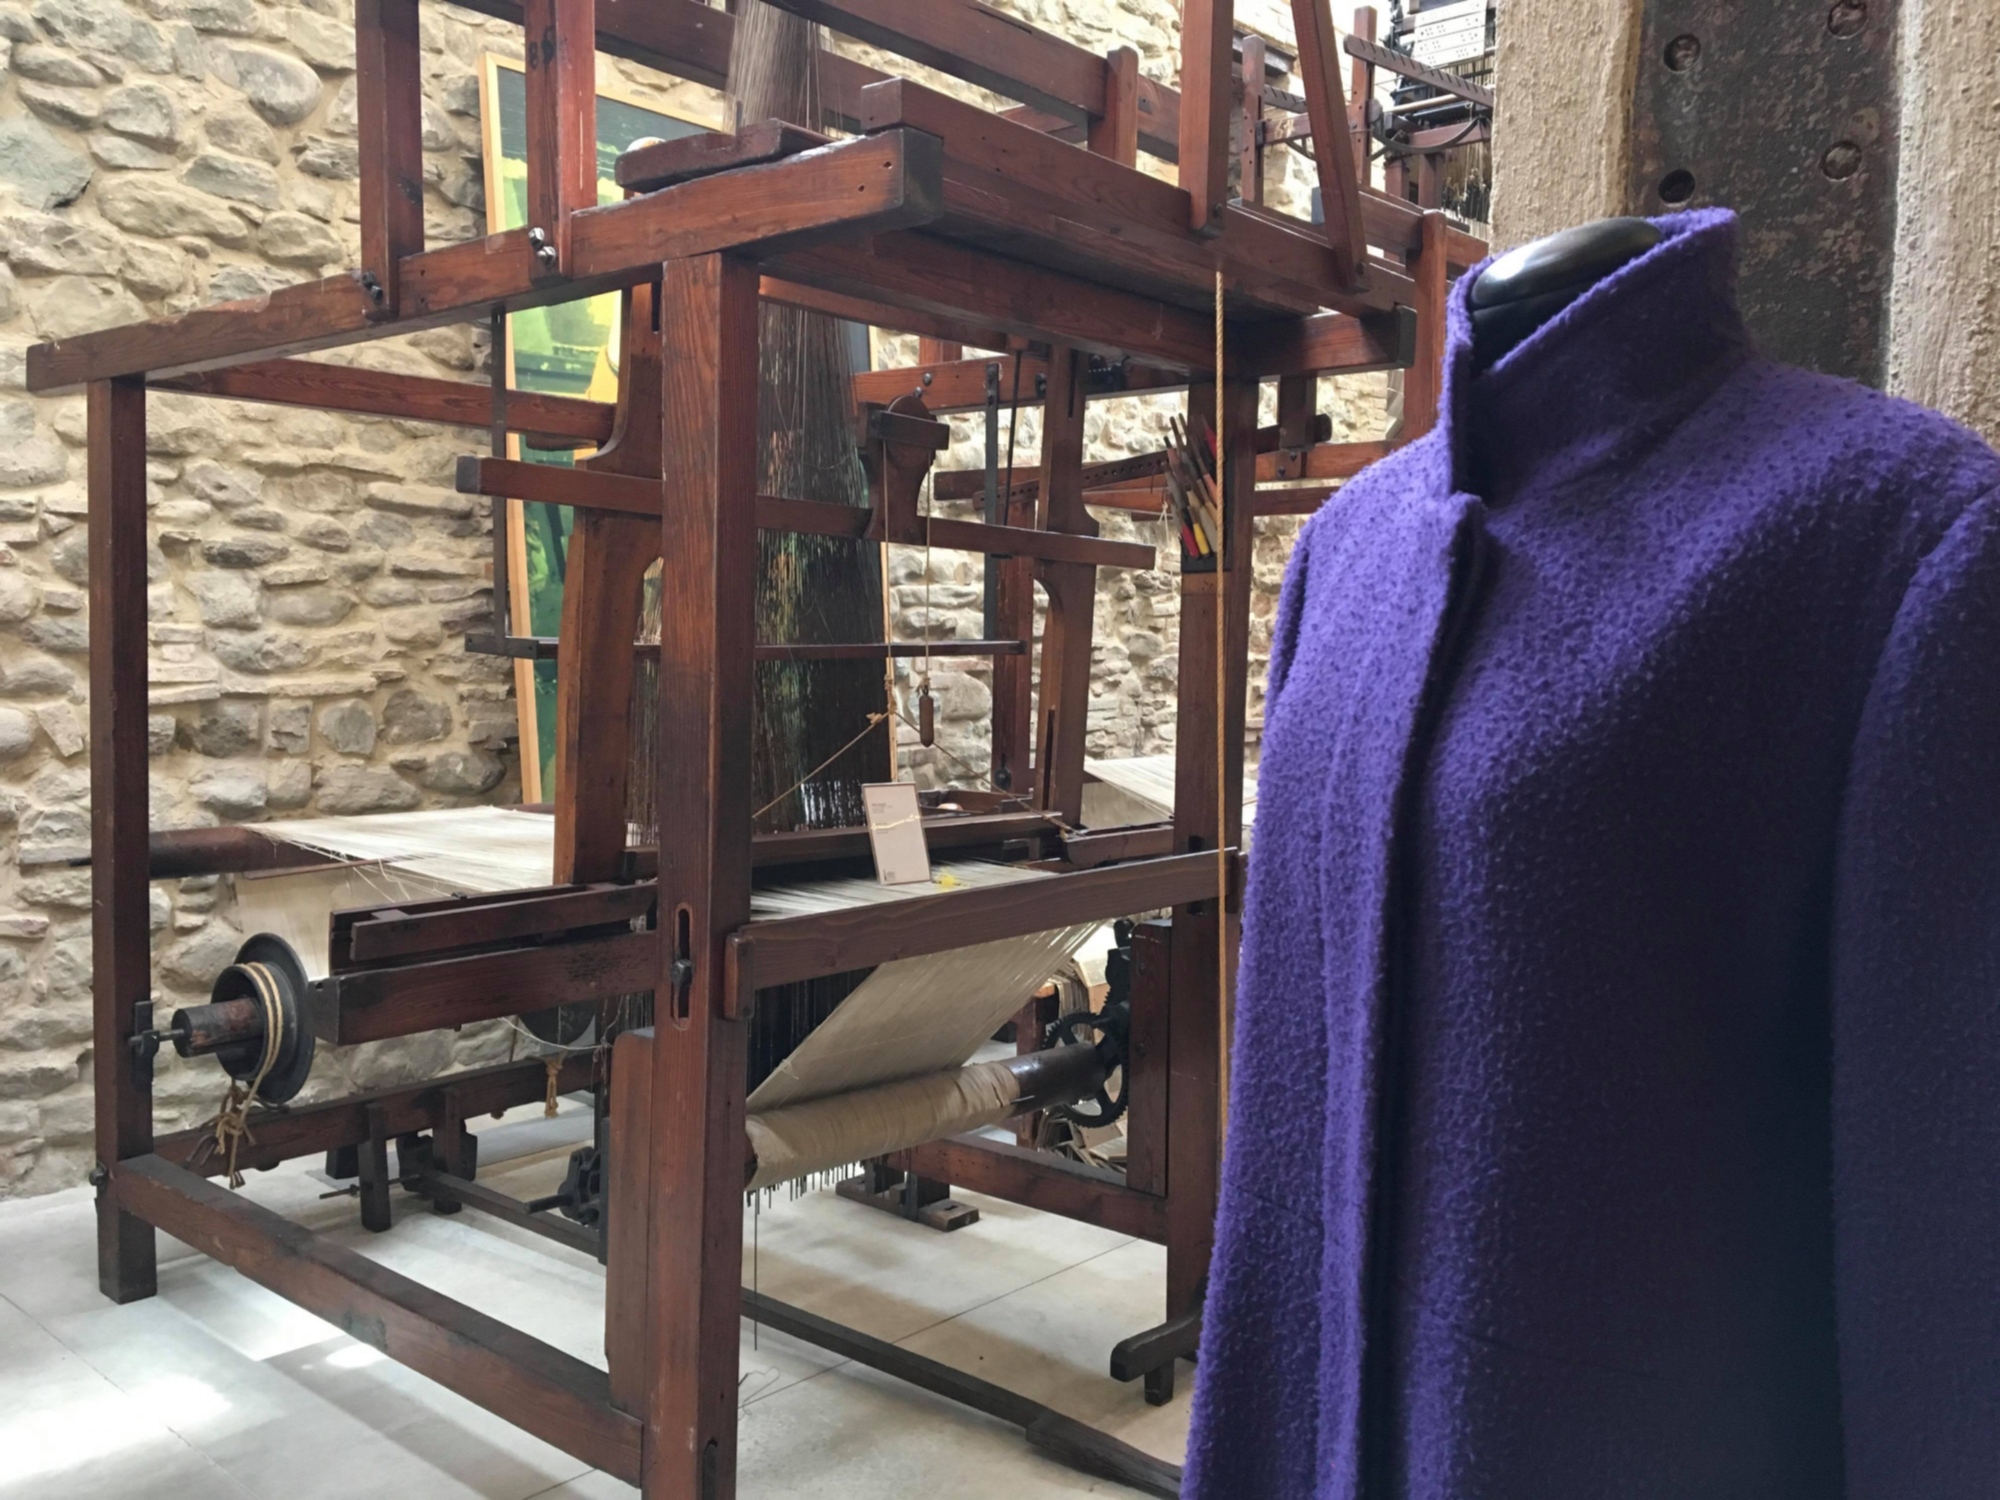 Casentino cloth and the ancient loom